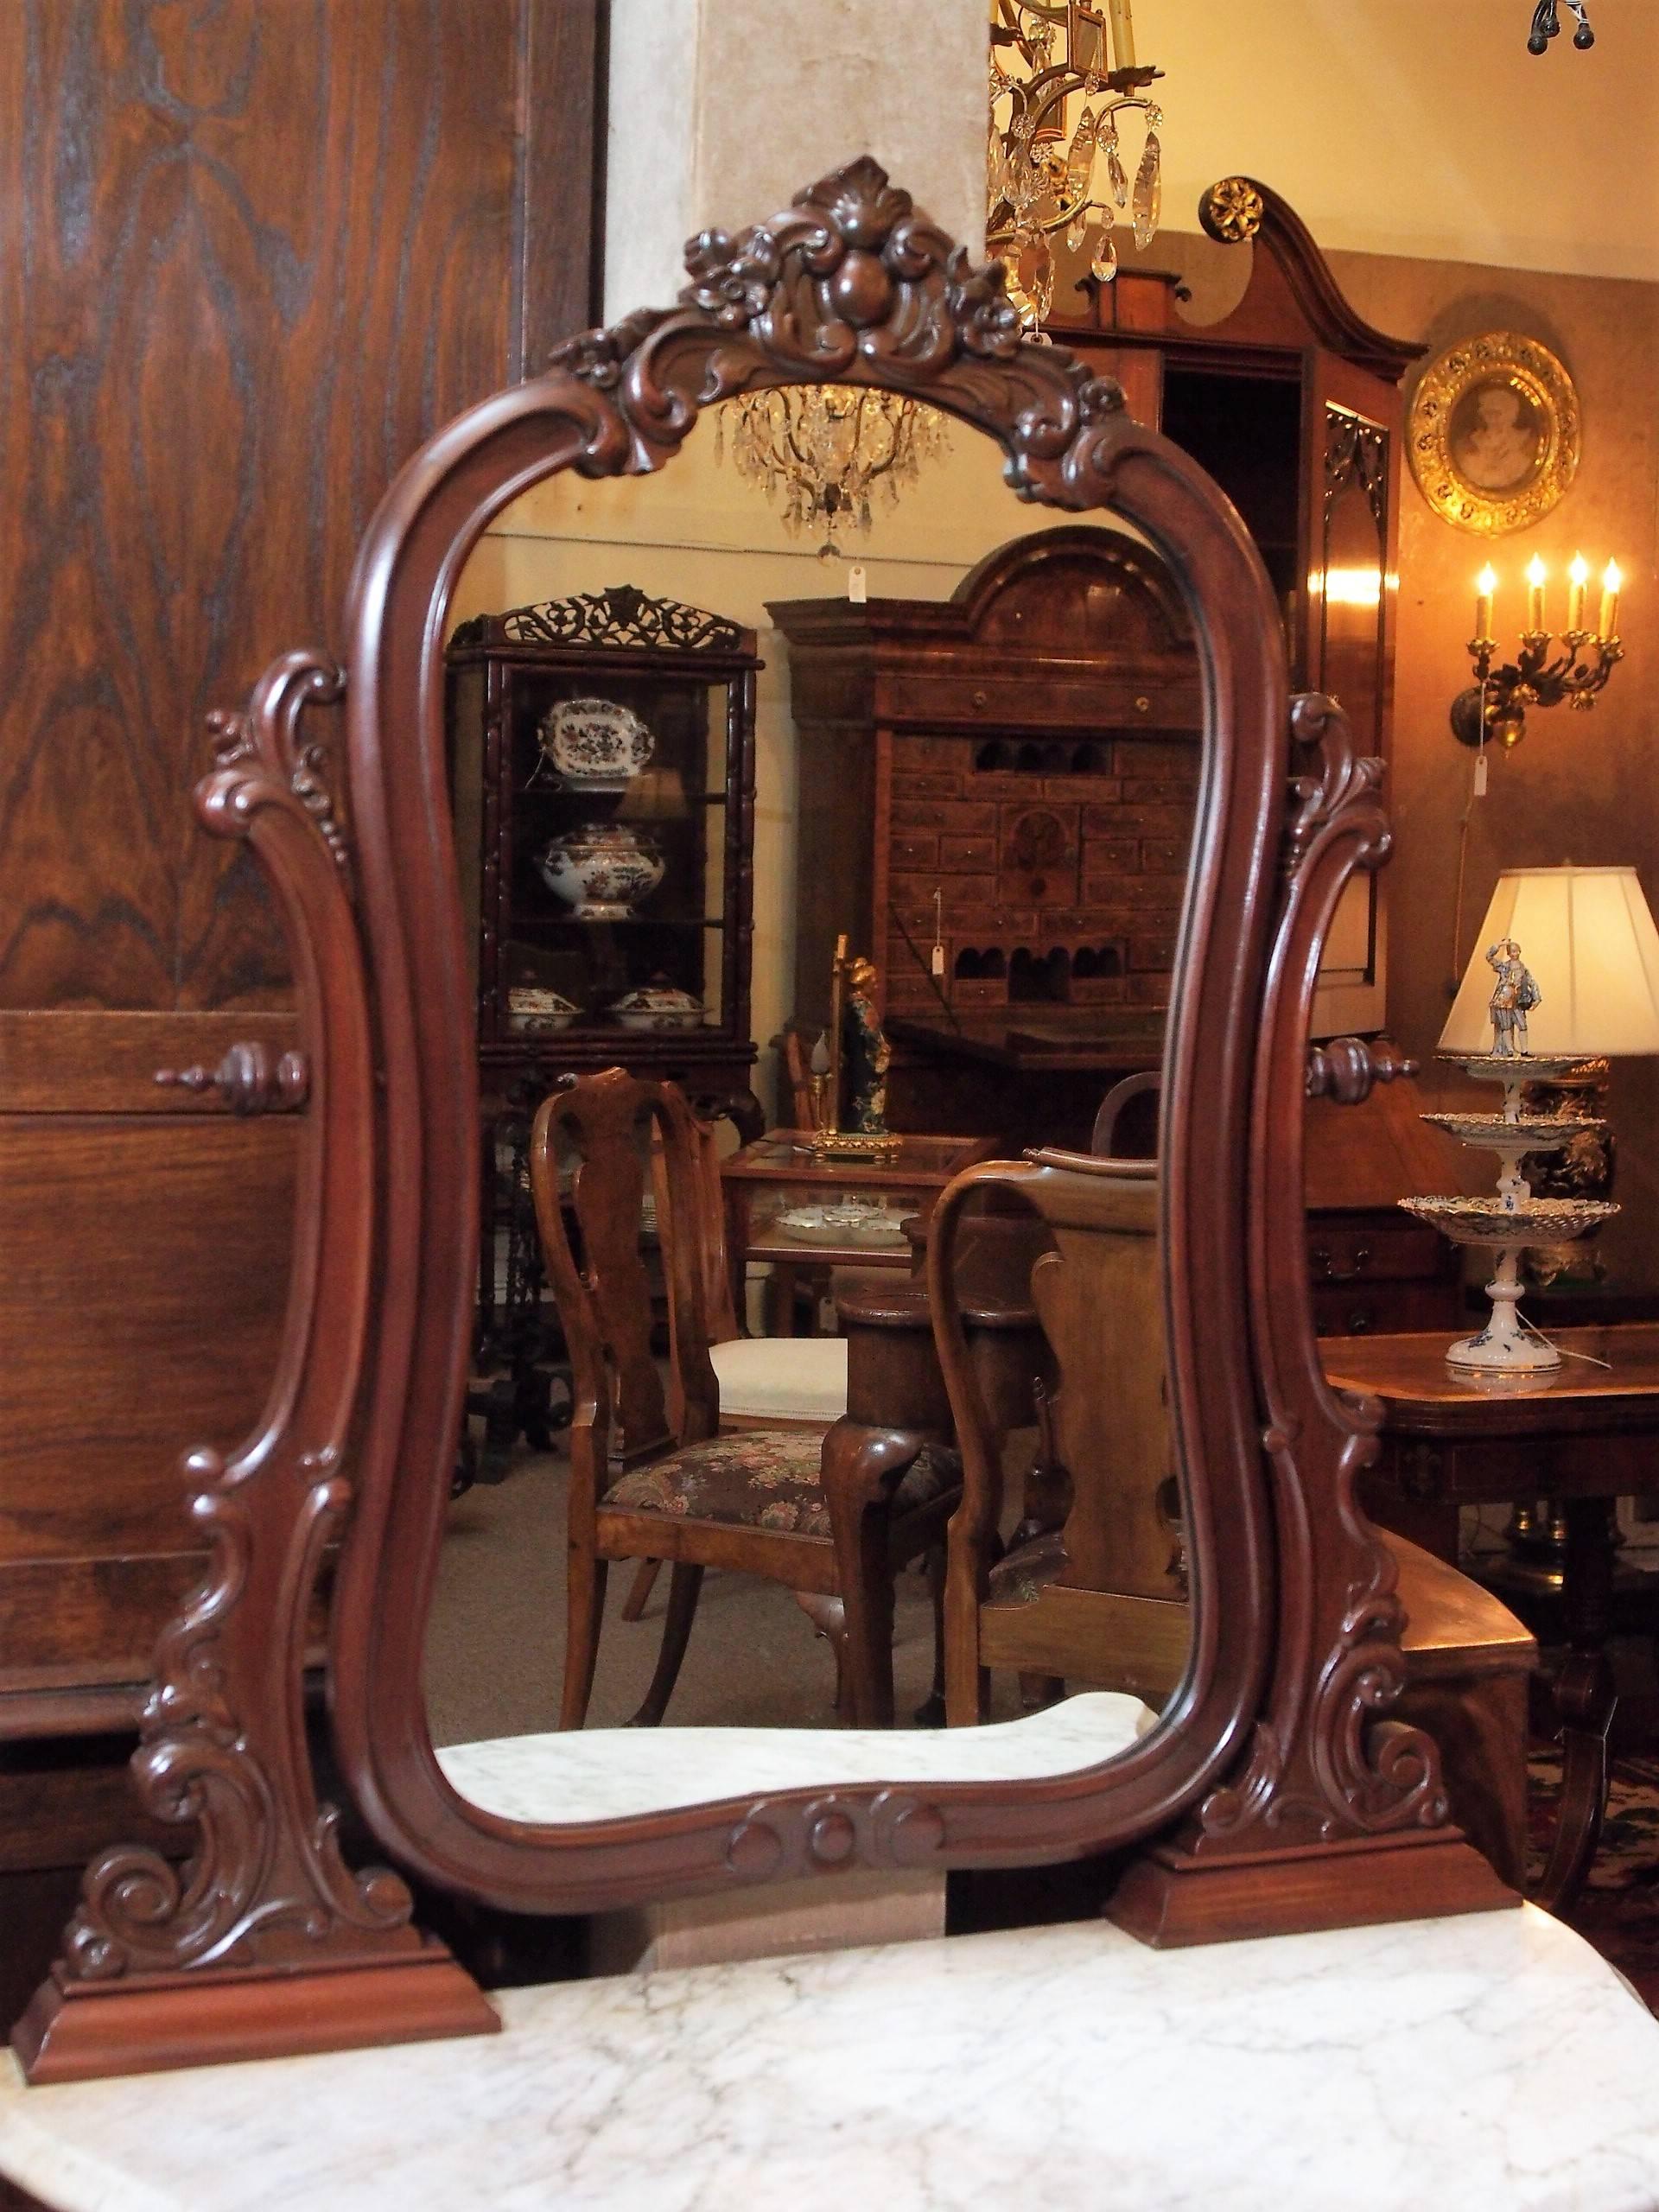 If you want to own a piece of Louisiana history, here is a dressing table to fit that bill.